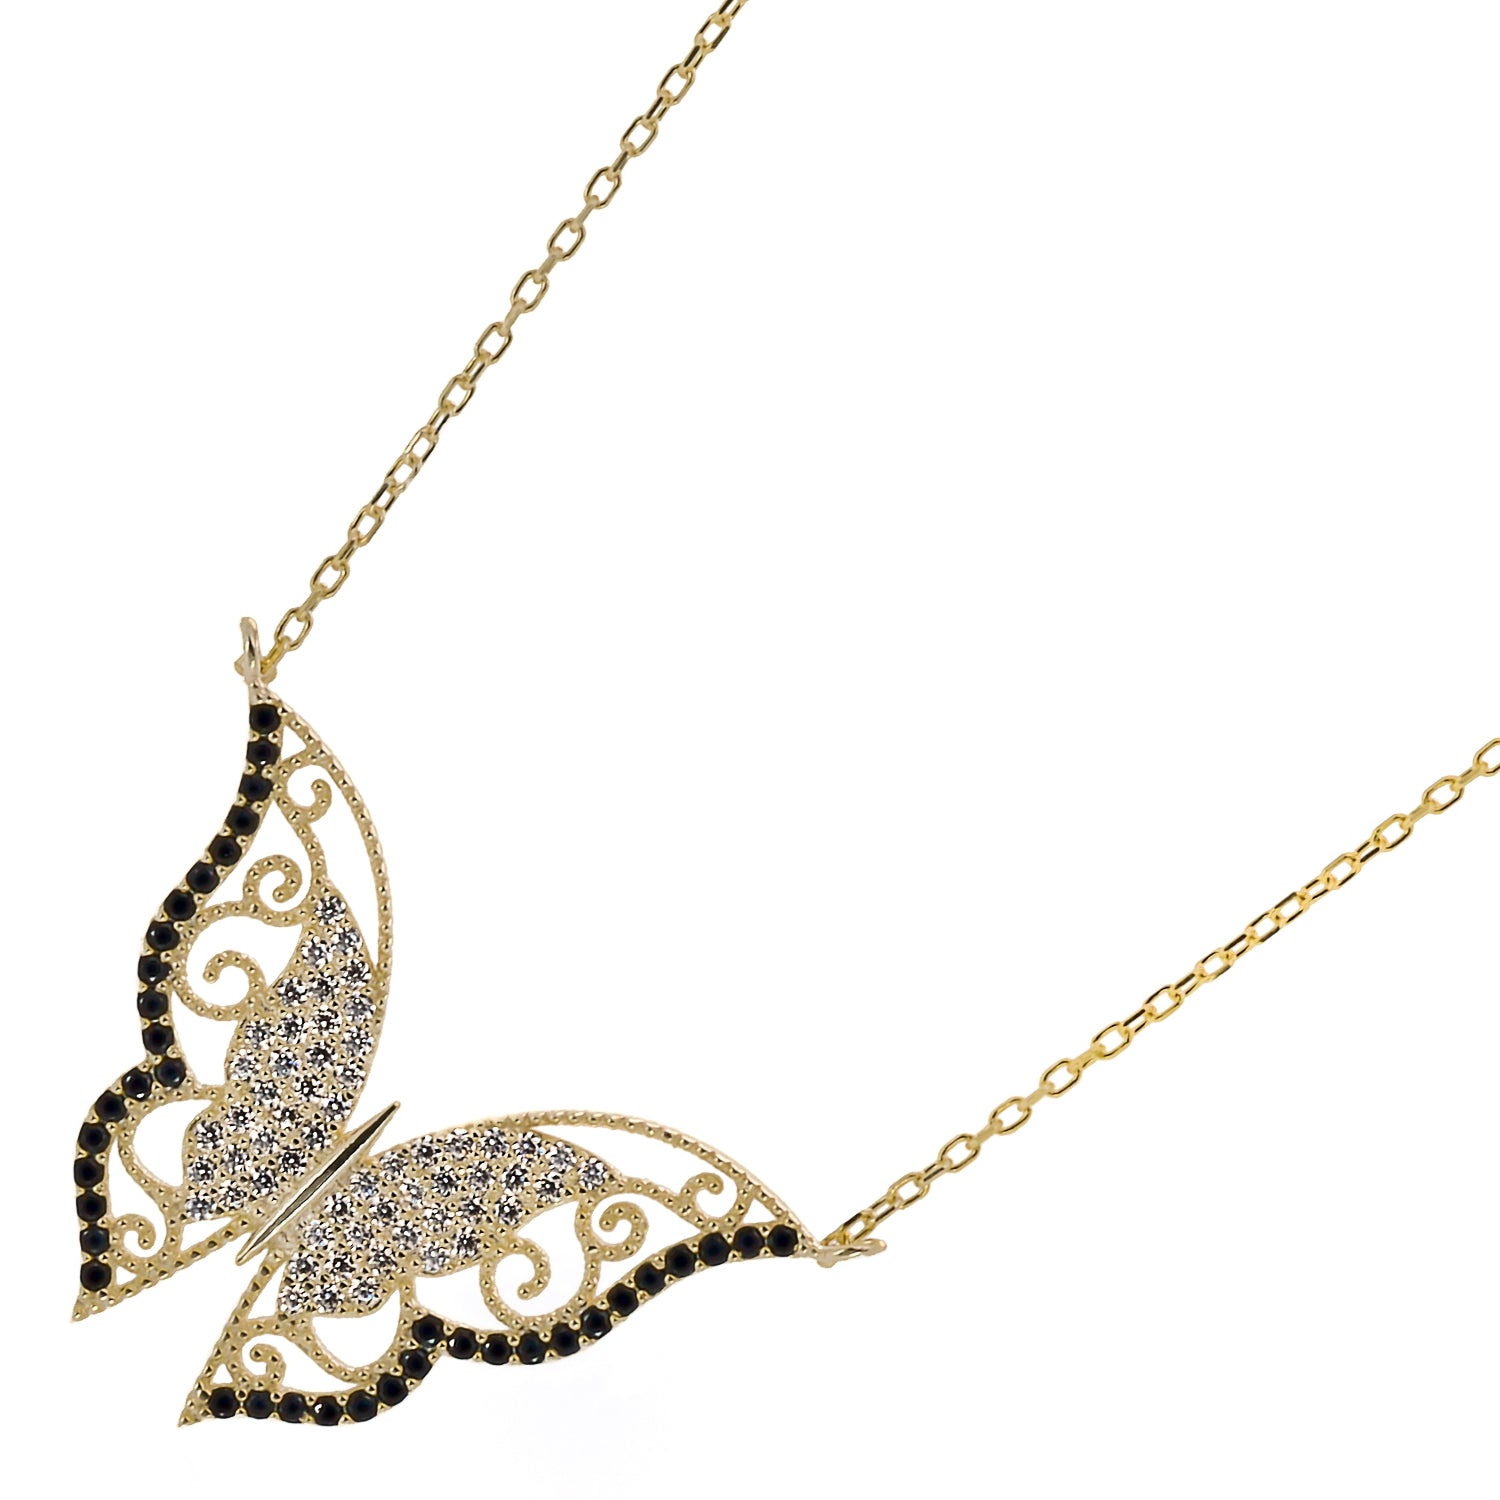 Gold Sparkly Joyful Butterfly Necklace, a meaningful accessory handcrafted with love and care.